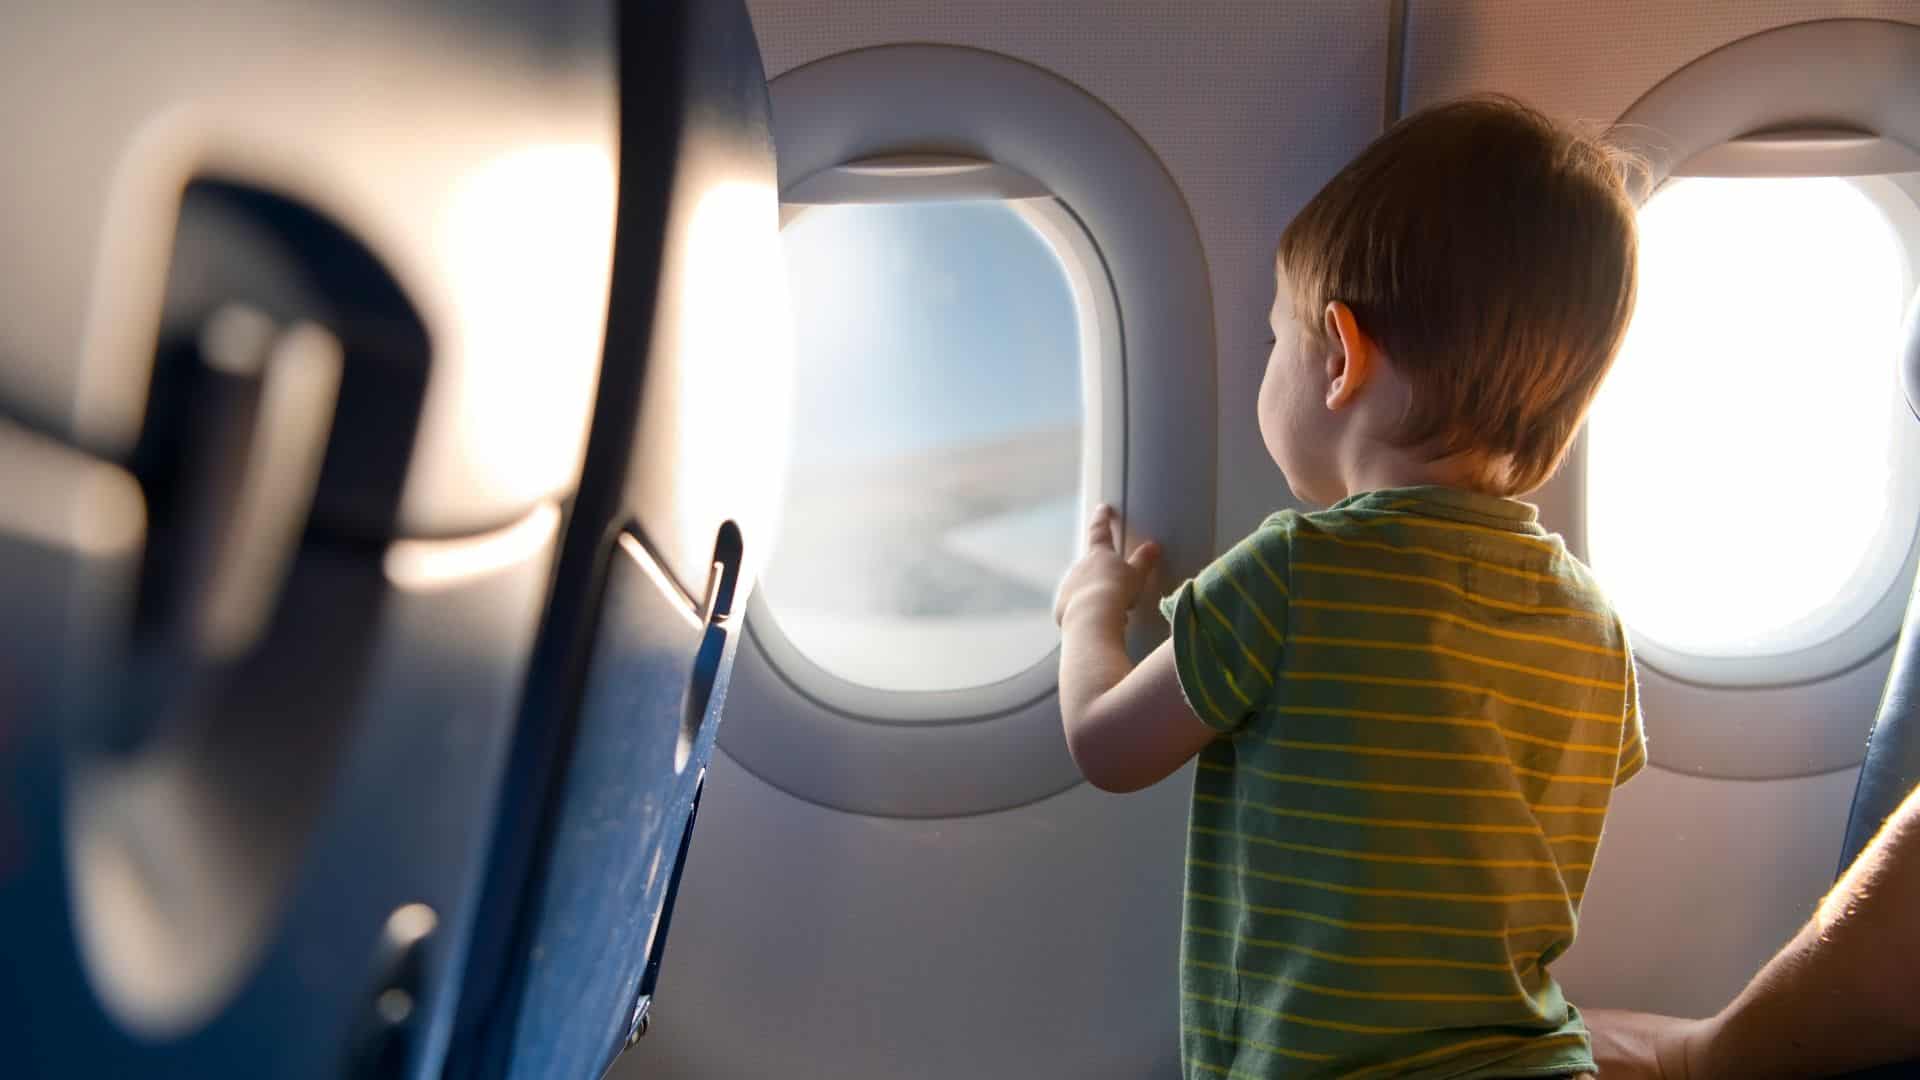 Does a 2-Year-Old Need a Plane Ticket?